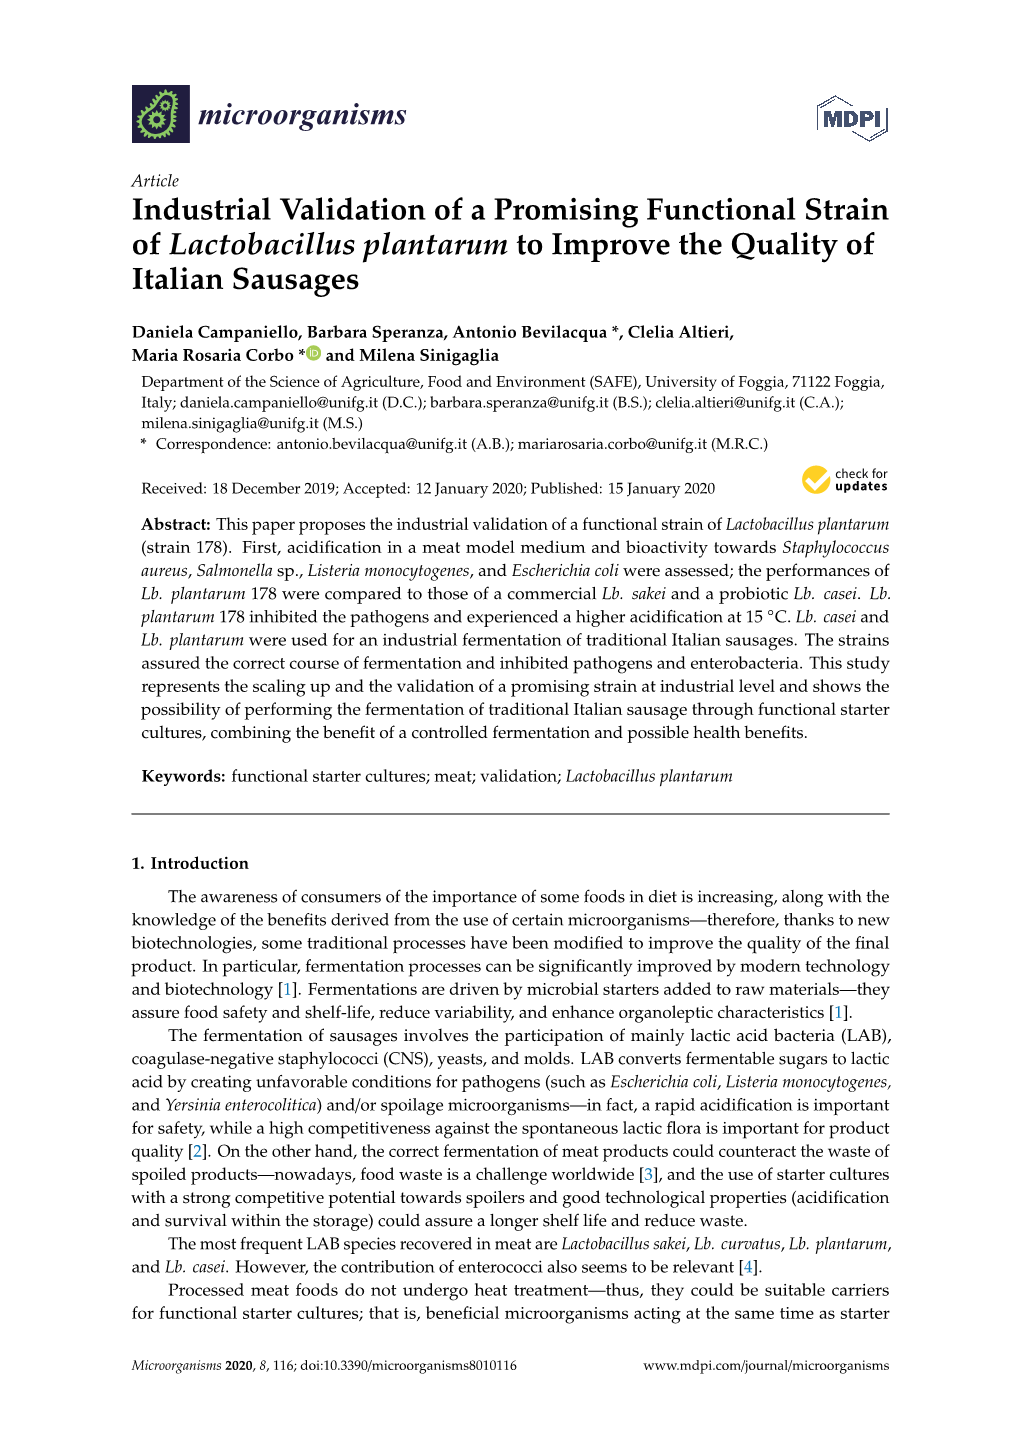 Industrial Validation of a Promising Functional Strain of Lactobacillus Plantarum to Improve the Quality of Italian Sausages